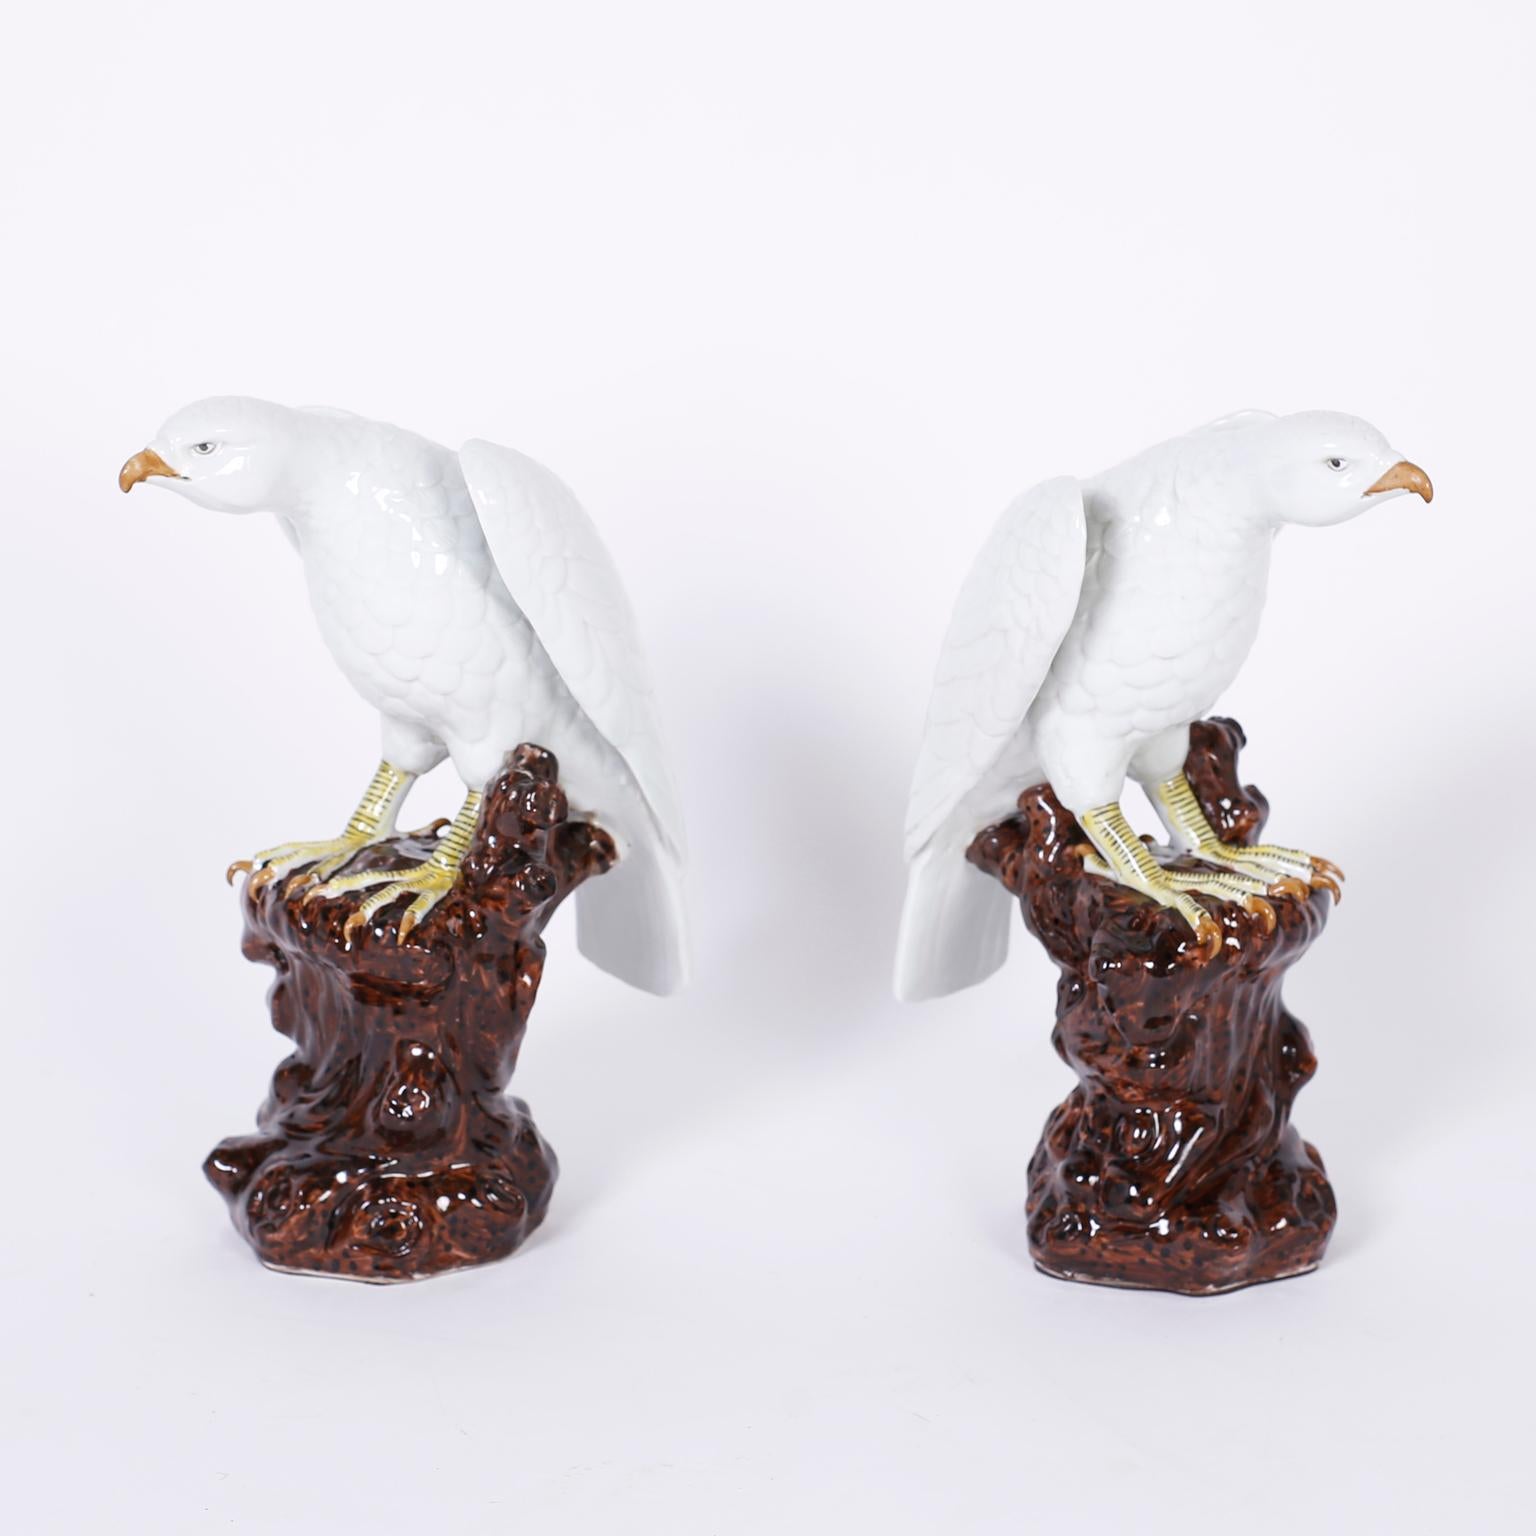 Pair of porcelain birds or white falcons with their confident attitude and formidable talons perched on faux tree trunks.